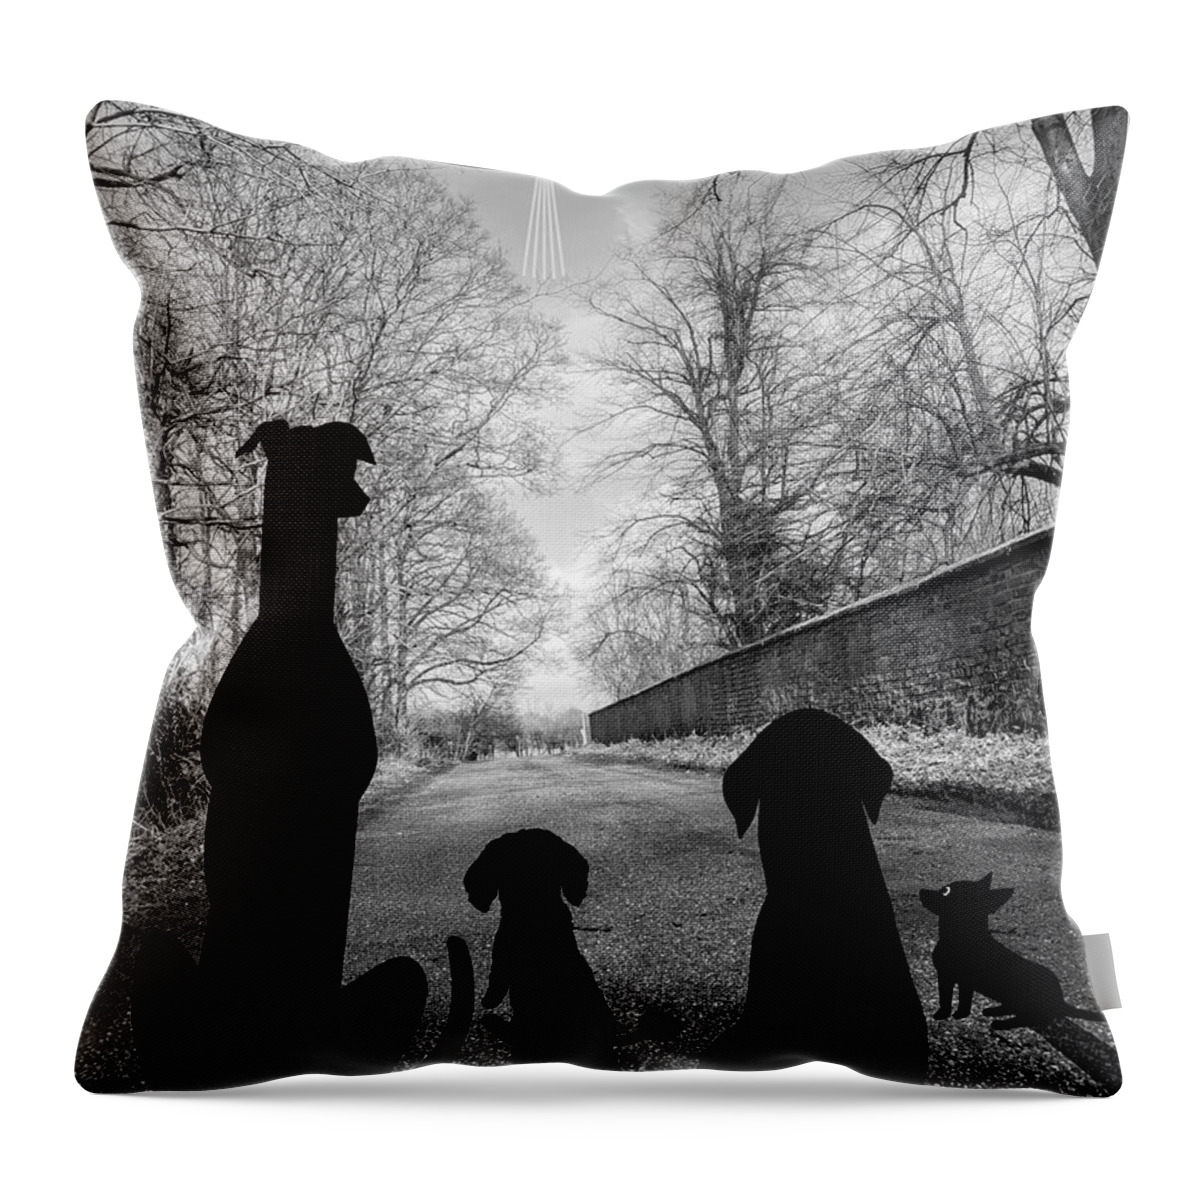 Dogs Throw Pillow featuring the digital art Dogs Spy Alien in Flying Saucer by Donna Mibus